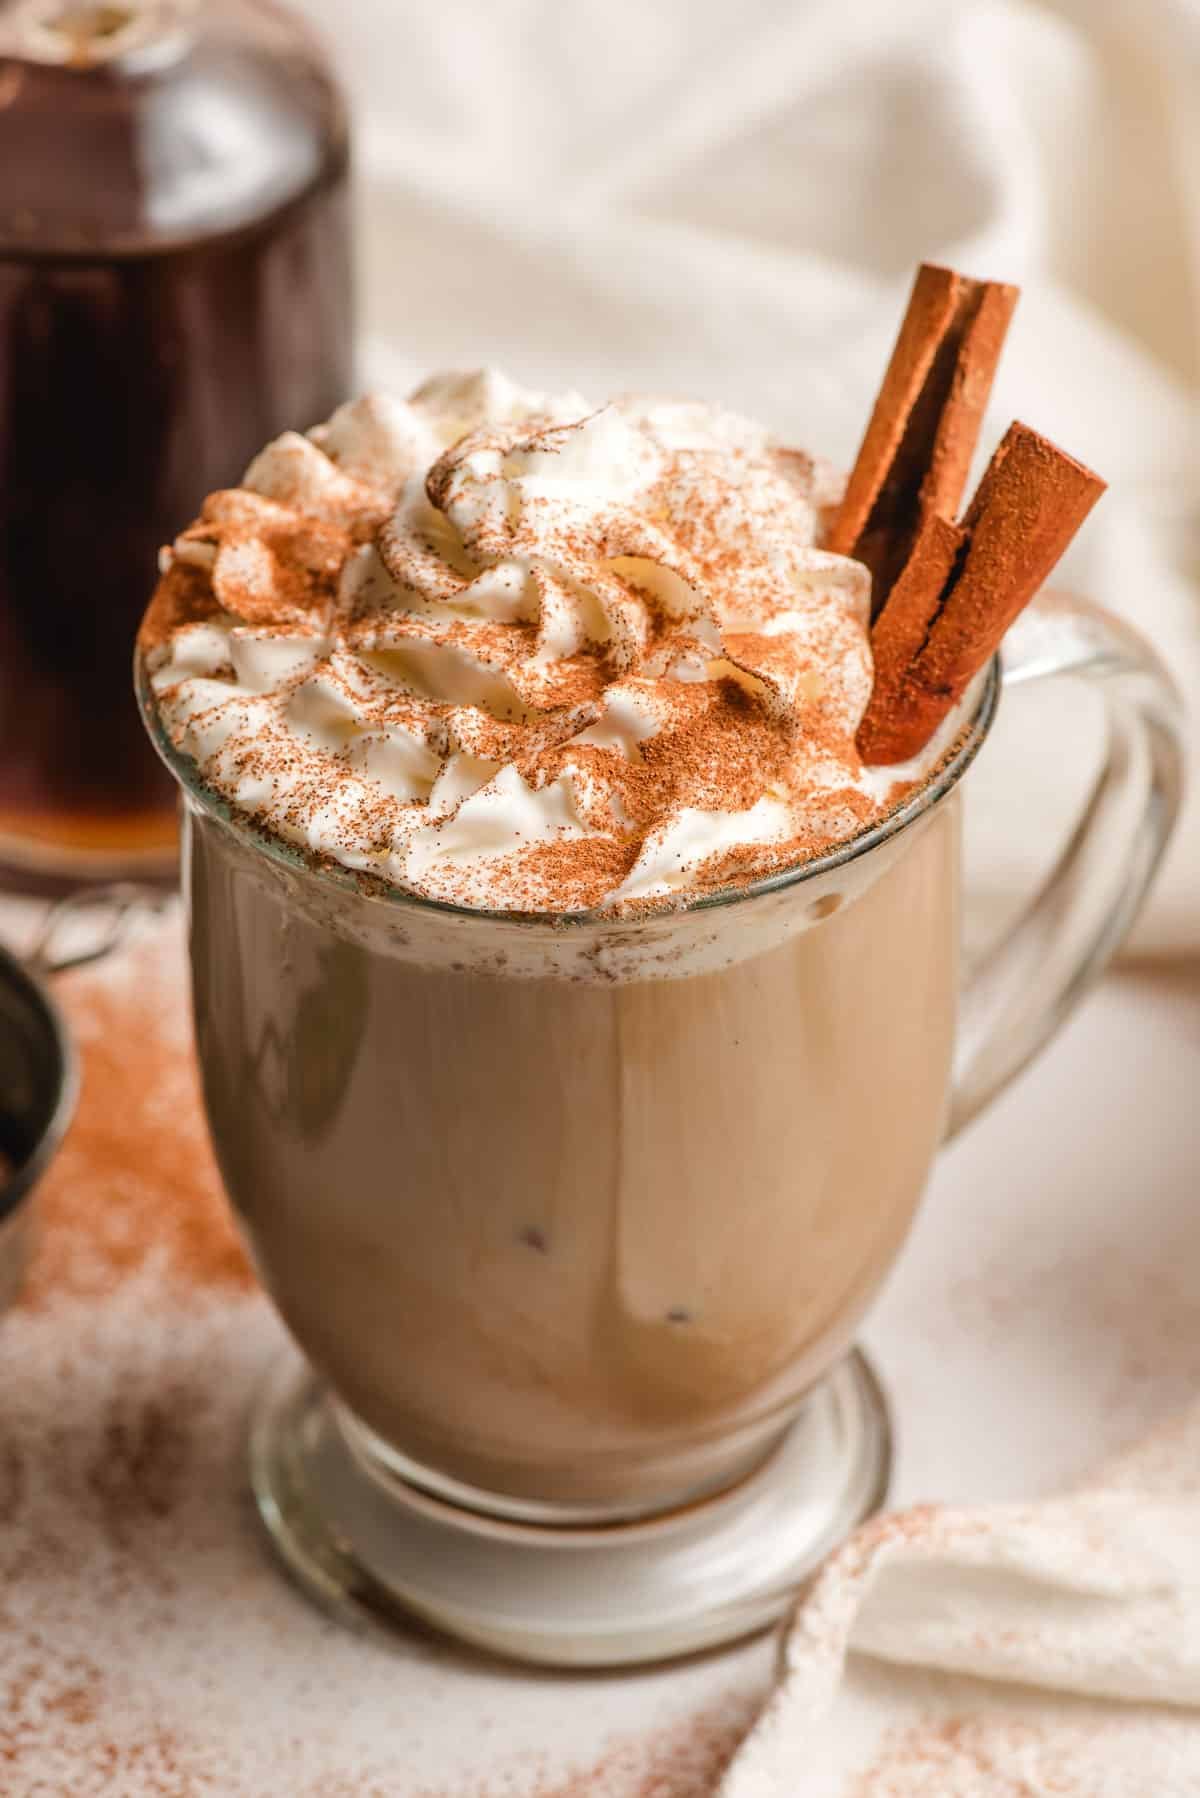 Glass mug filled with a cinnamon spiced latte and topped with whipped cream, cinnamon sticks, and ground cinnamon.